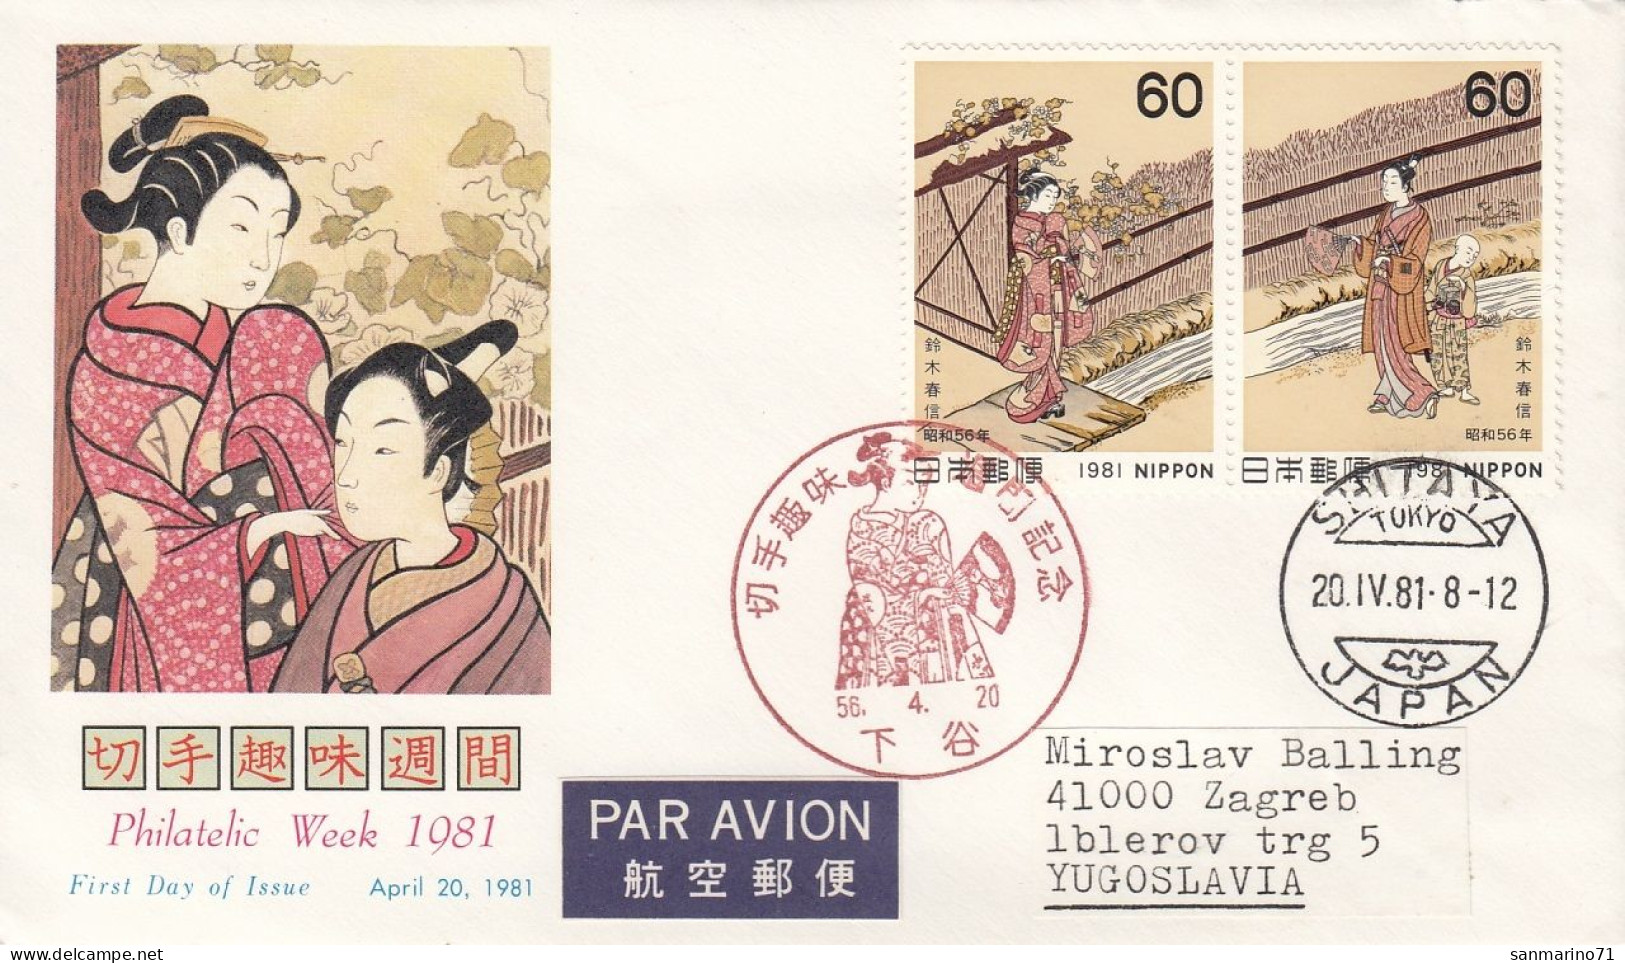 JAPAN FDC 1466-1467 - Costumes